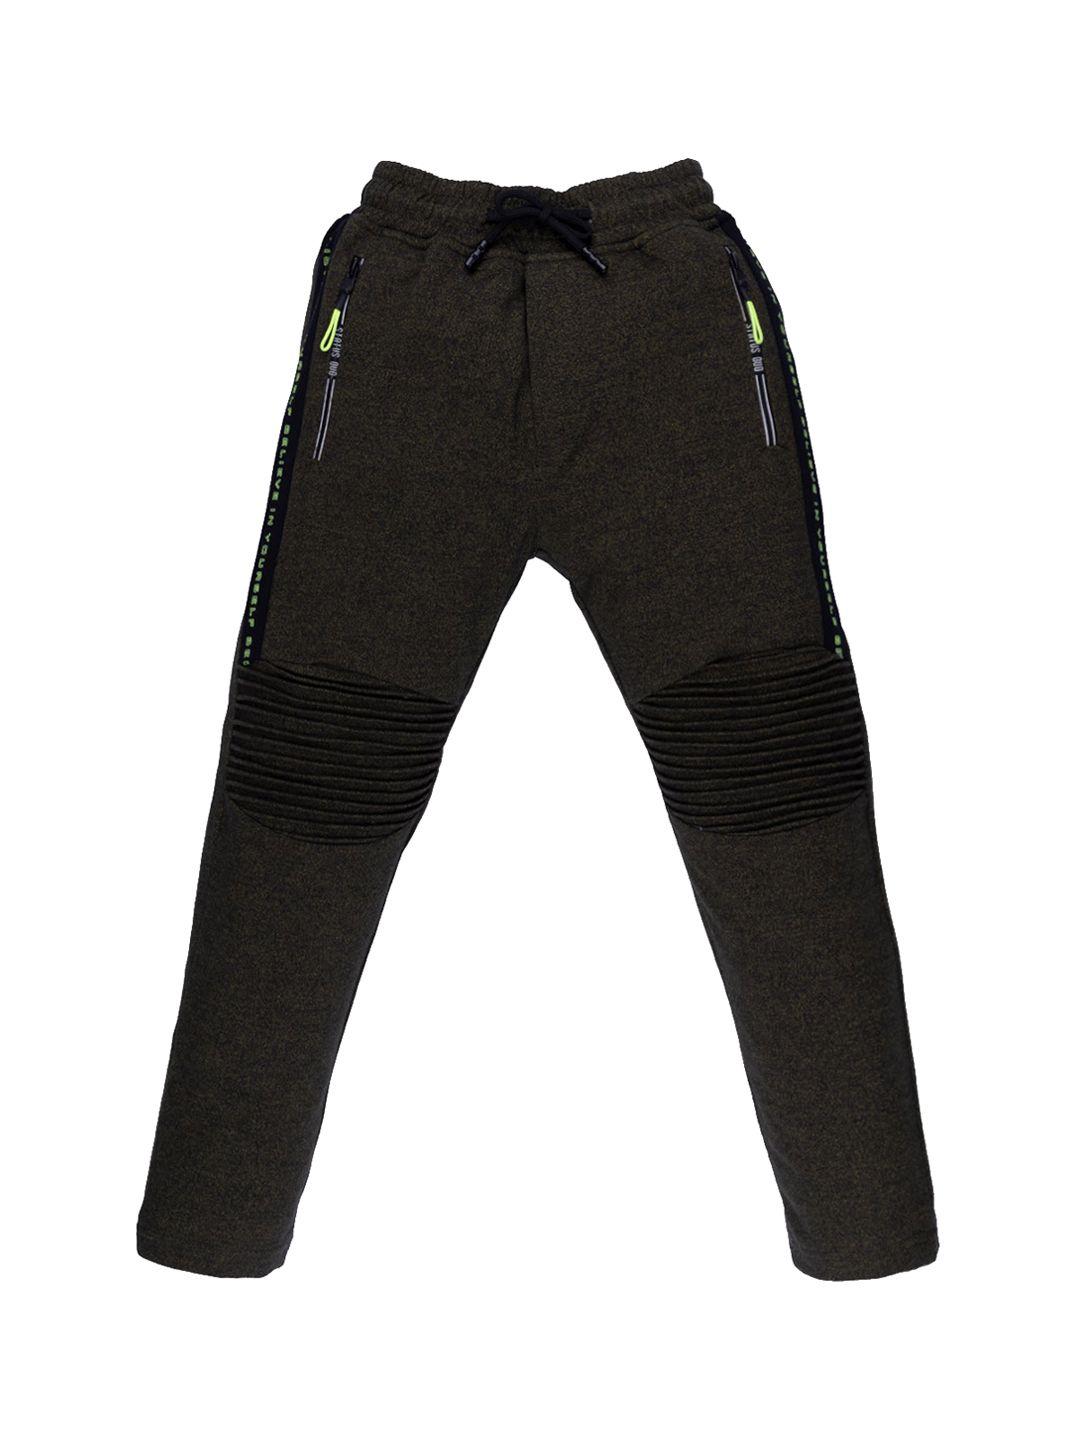 status quo boys olive-green solid regular fit cotton track pants